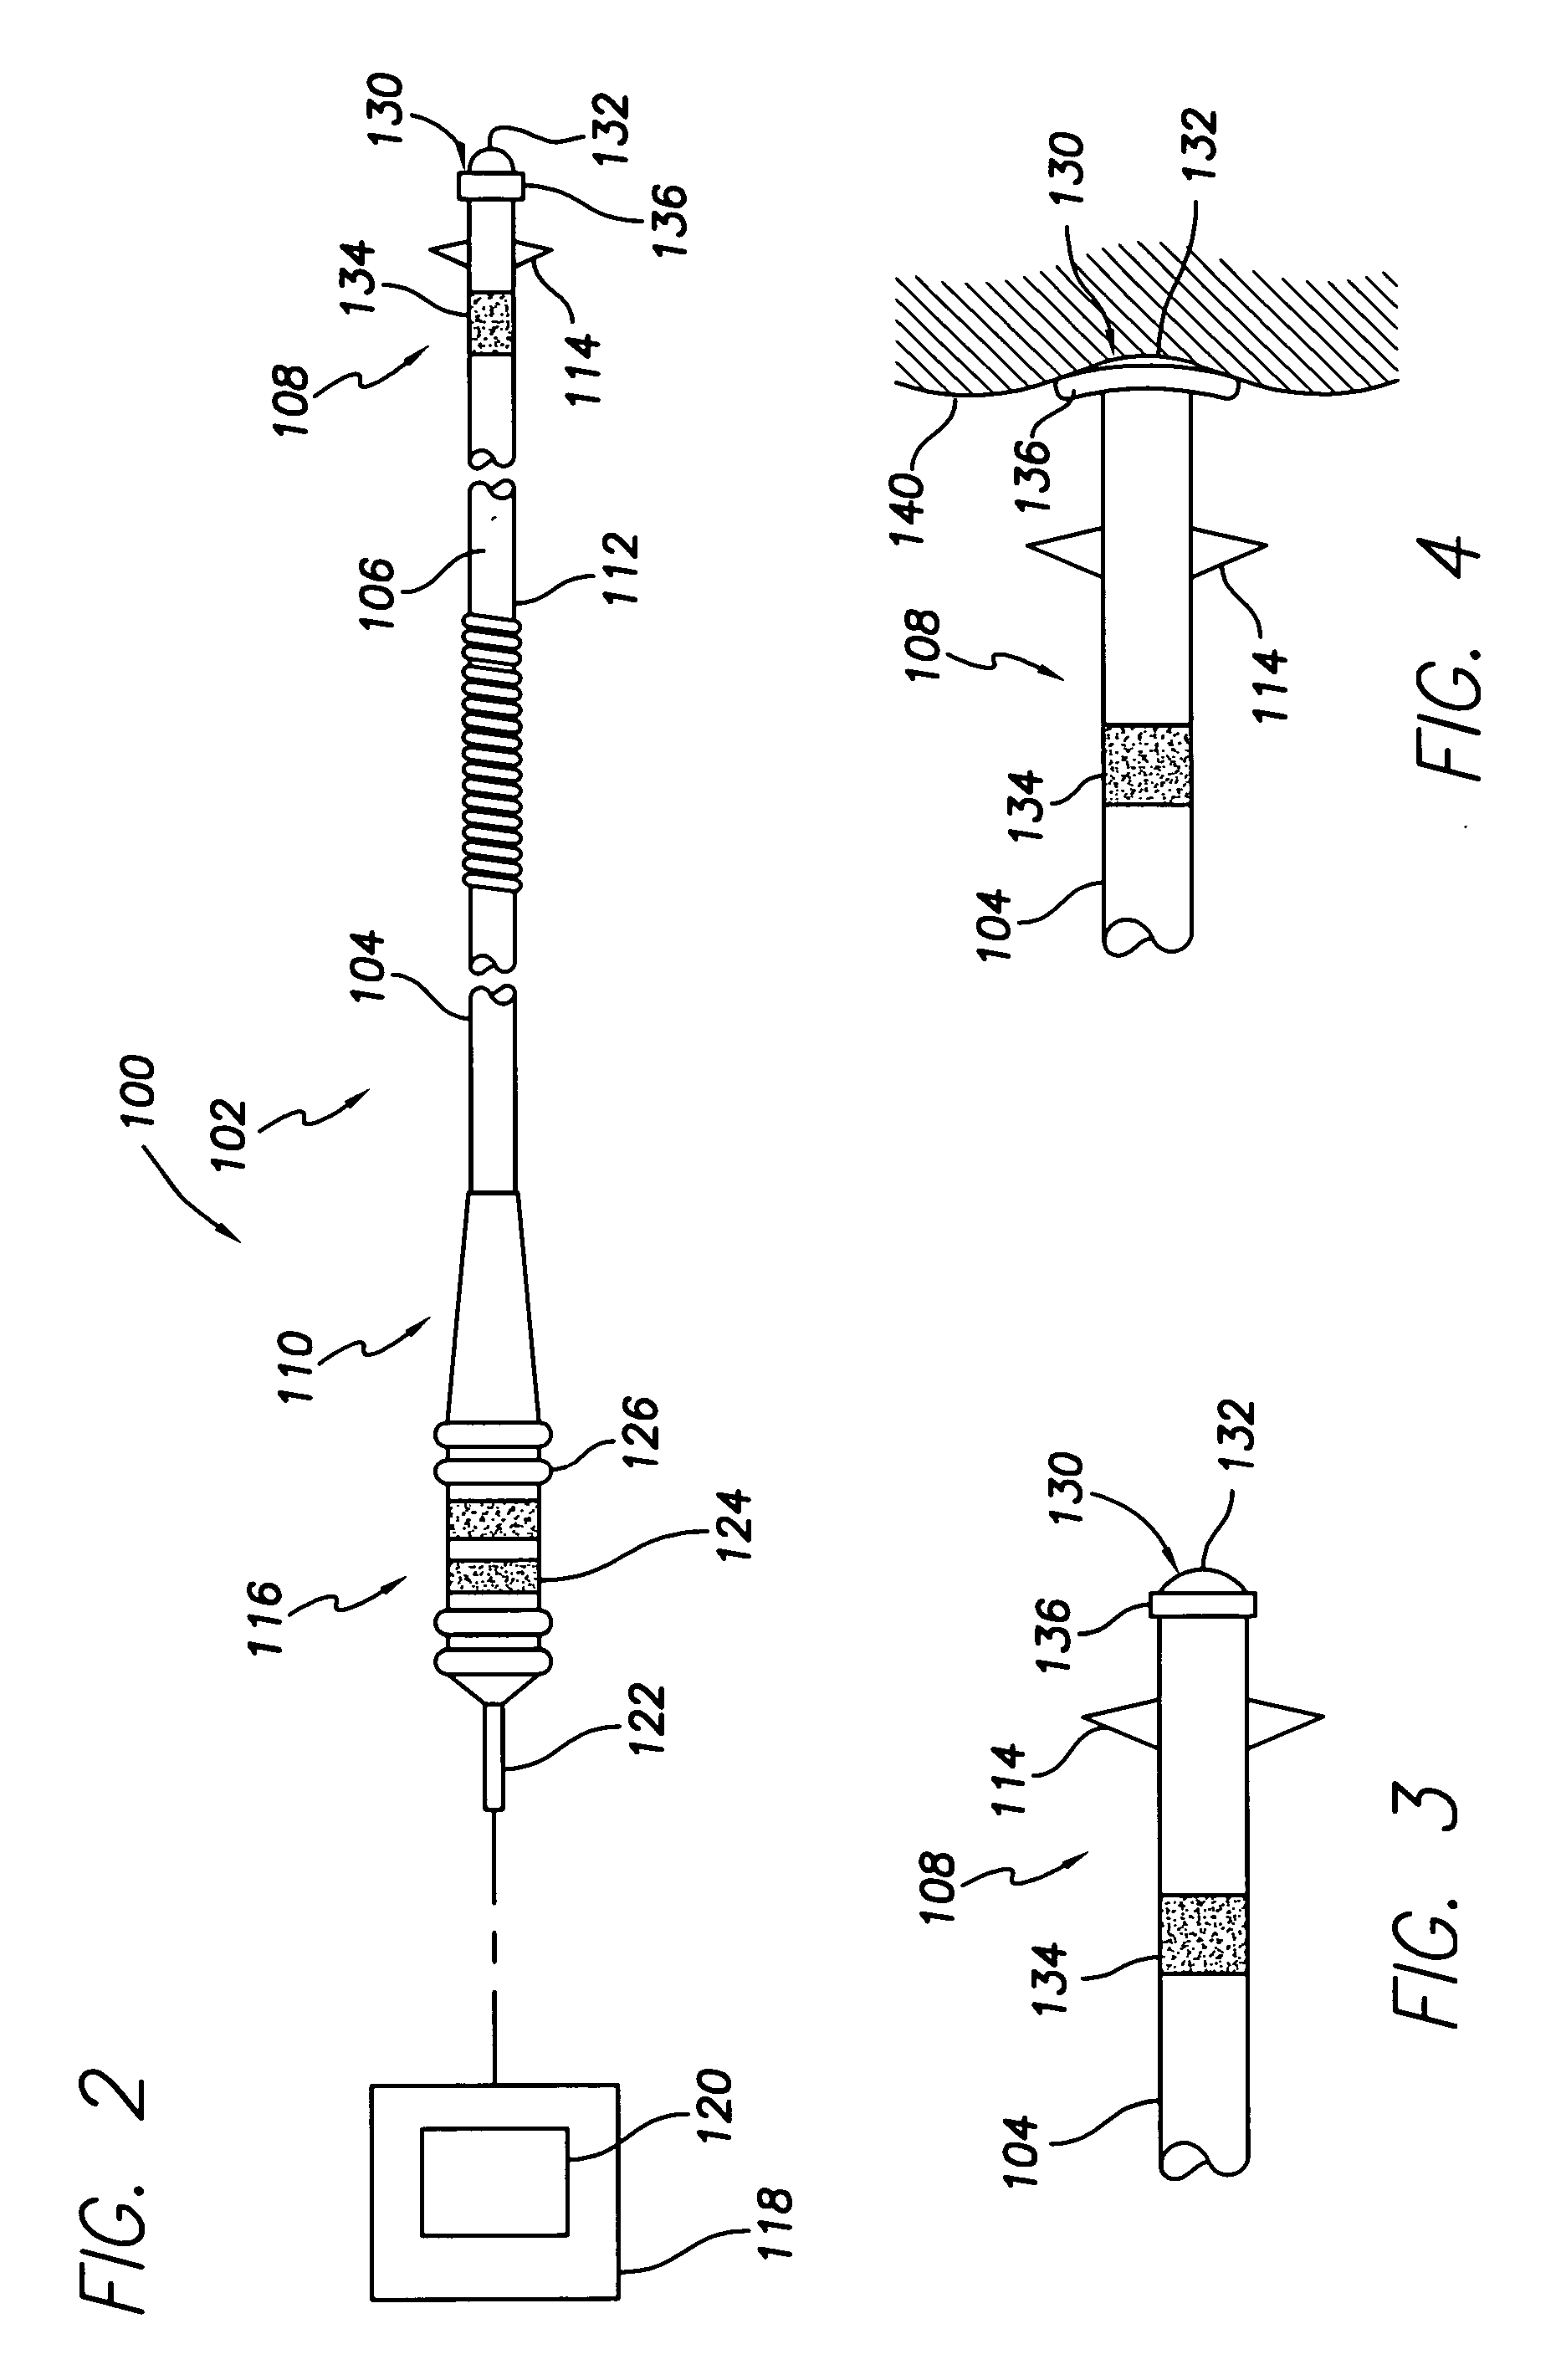 Medical lead with tissue-protecting tip structure